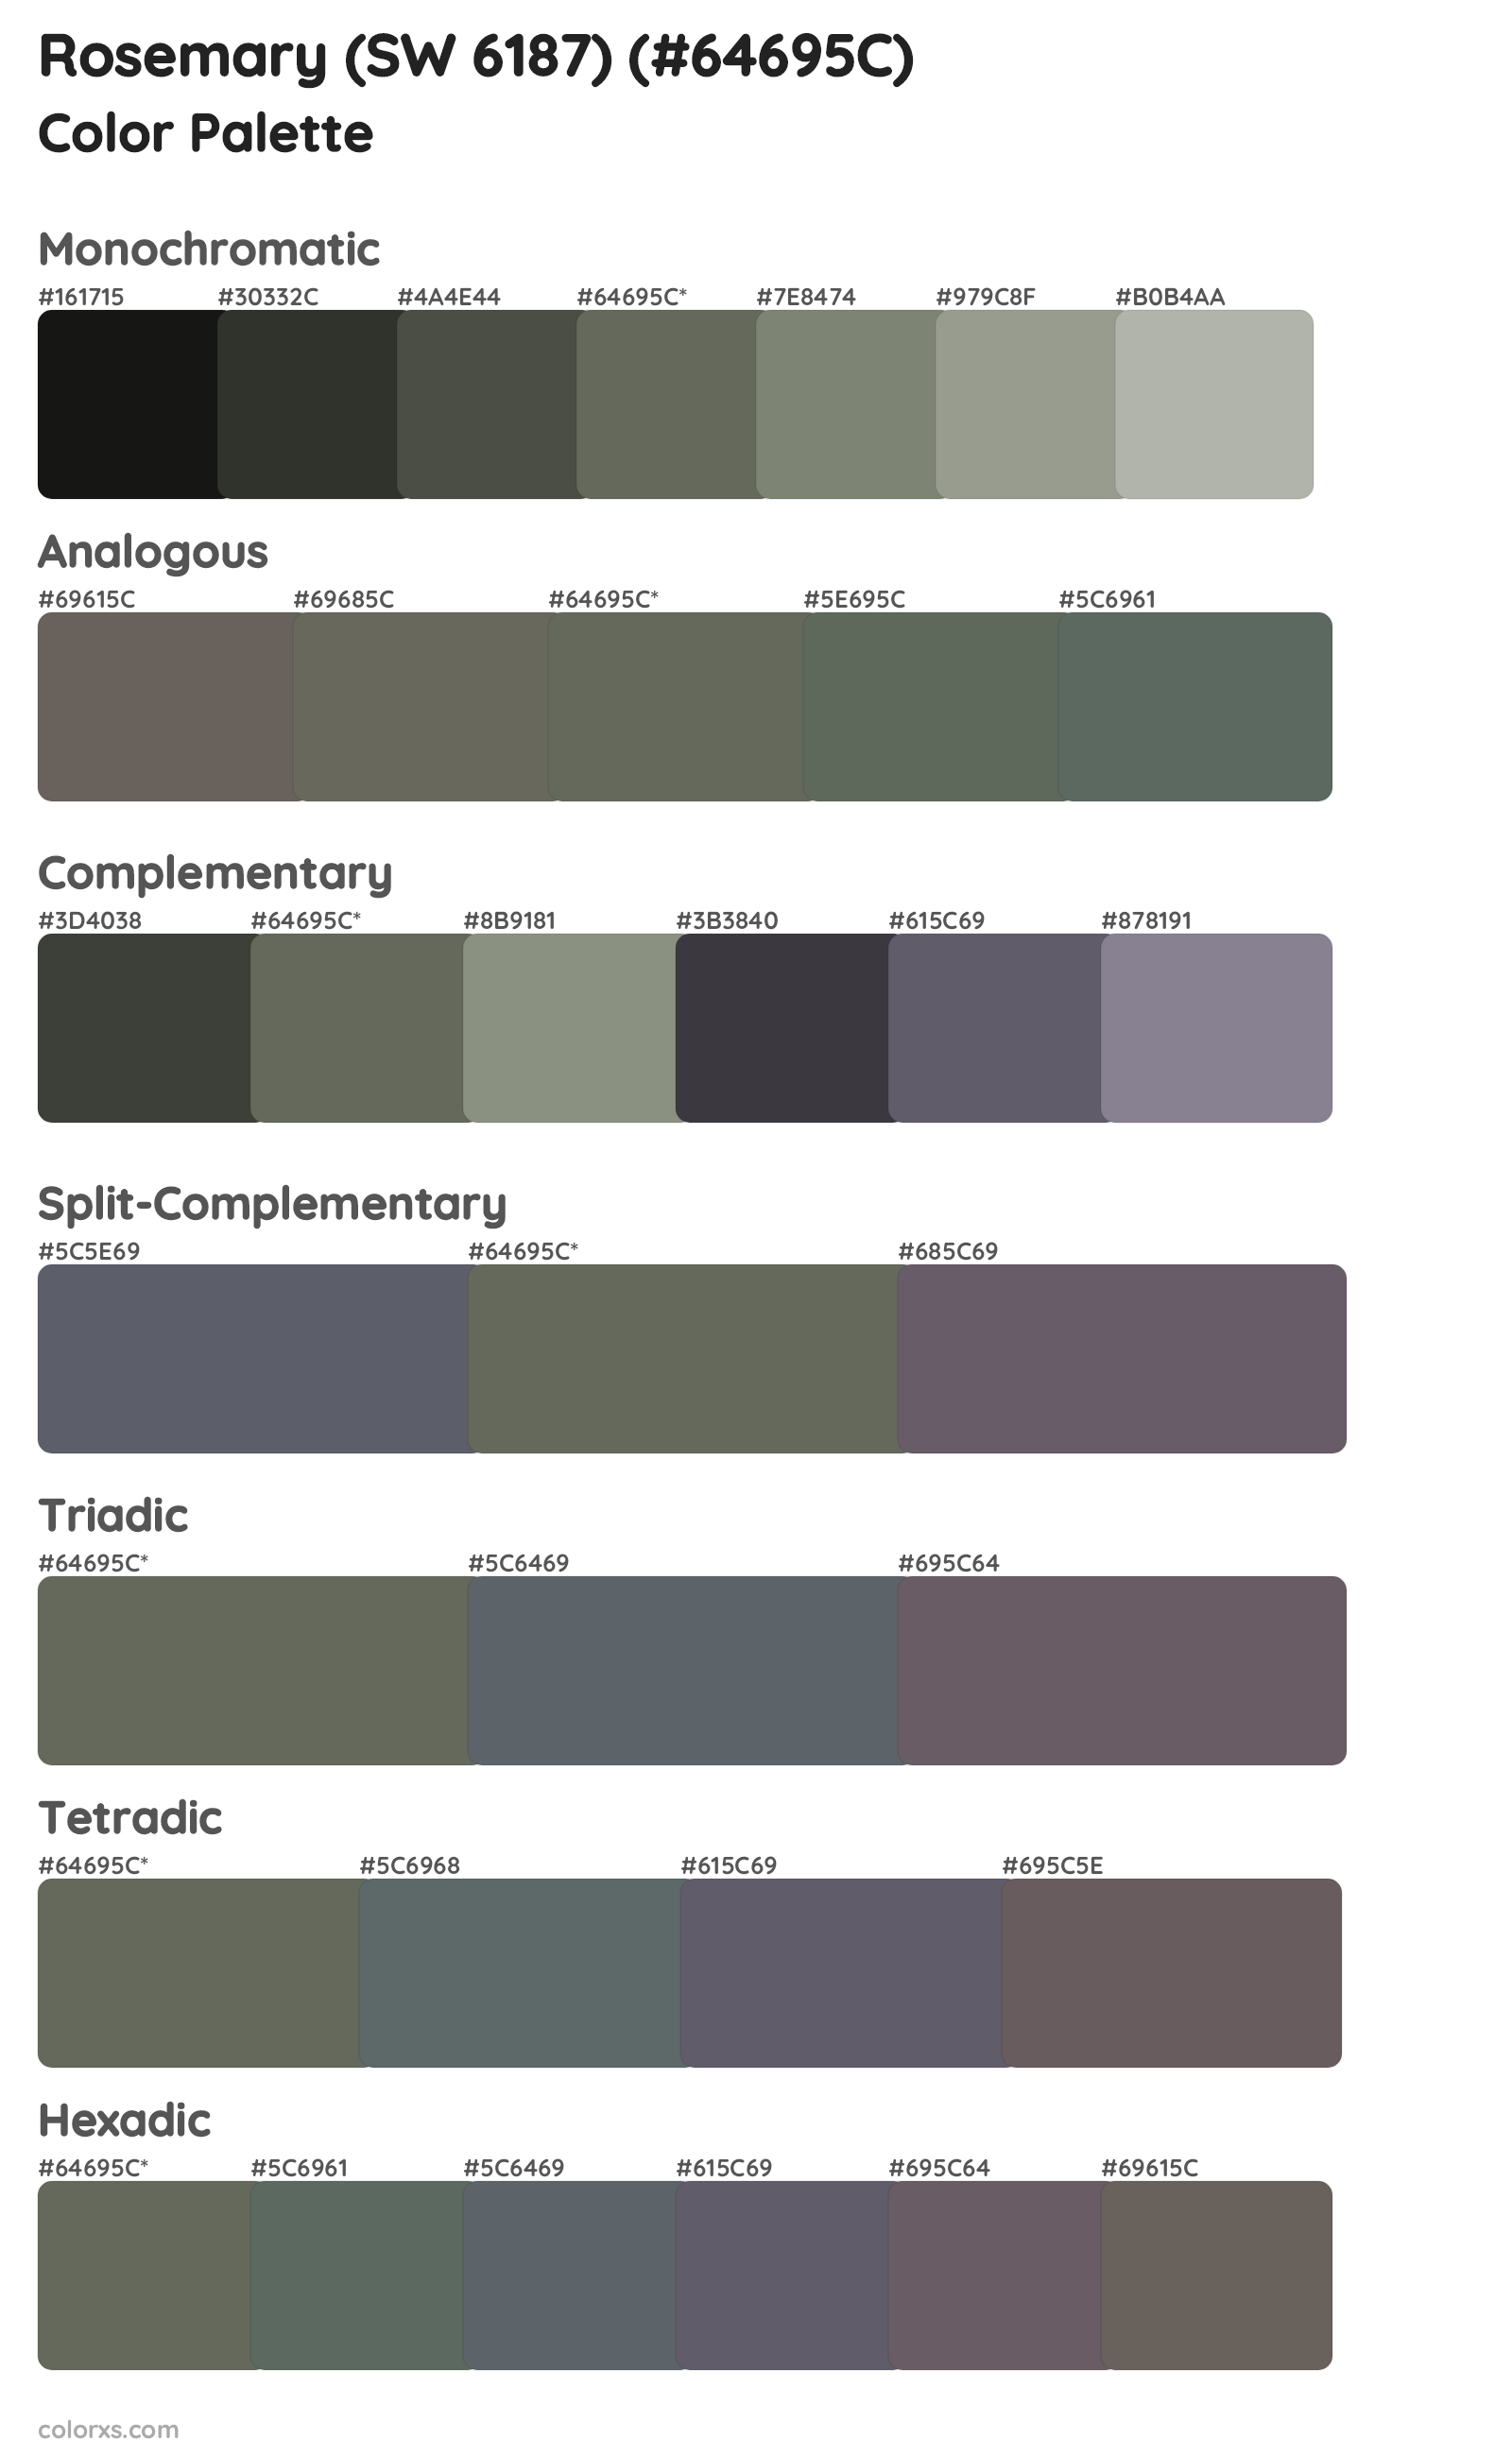 Rosemary (SW 6187) Color Scheme Palettes